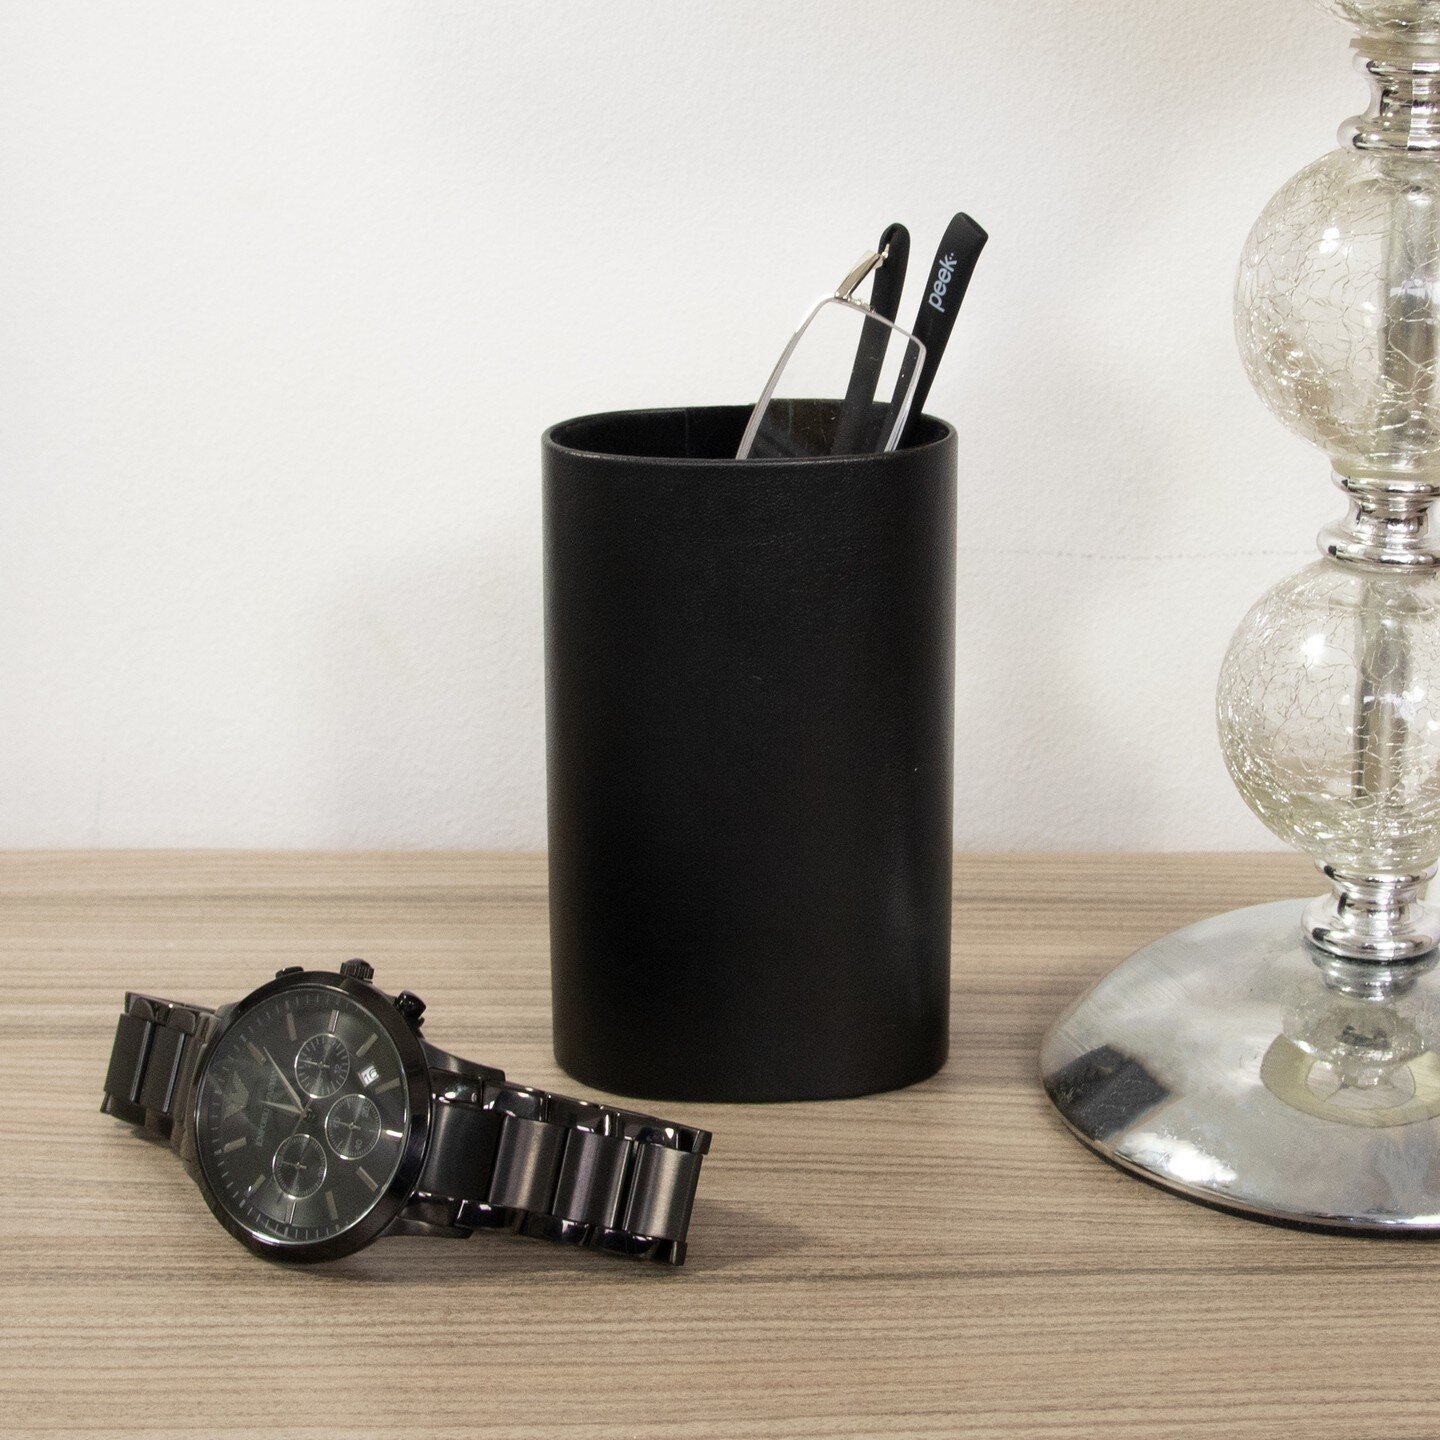 Know exactly where you put your glasses with the DROP IN stand! 👌🤓⁠
⁠
Ideal for having on your desk or bedside table.⁠
⁠
Finished in a classic black synthetic leather with stud details.⁠
⁠
Shop it on theglassescaseshop.co.uk⁠
⁠
#glasses #specs #gla